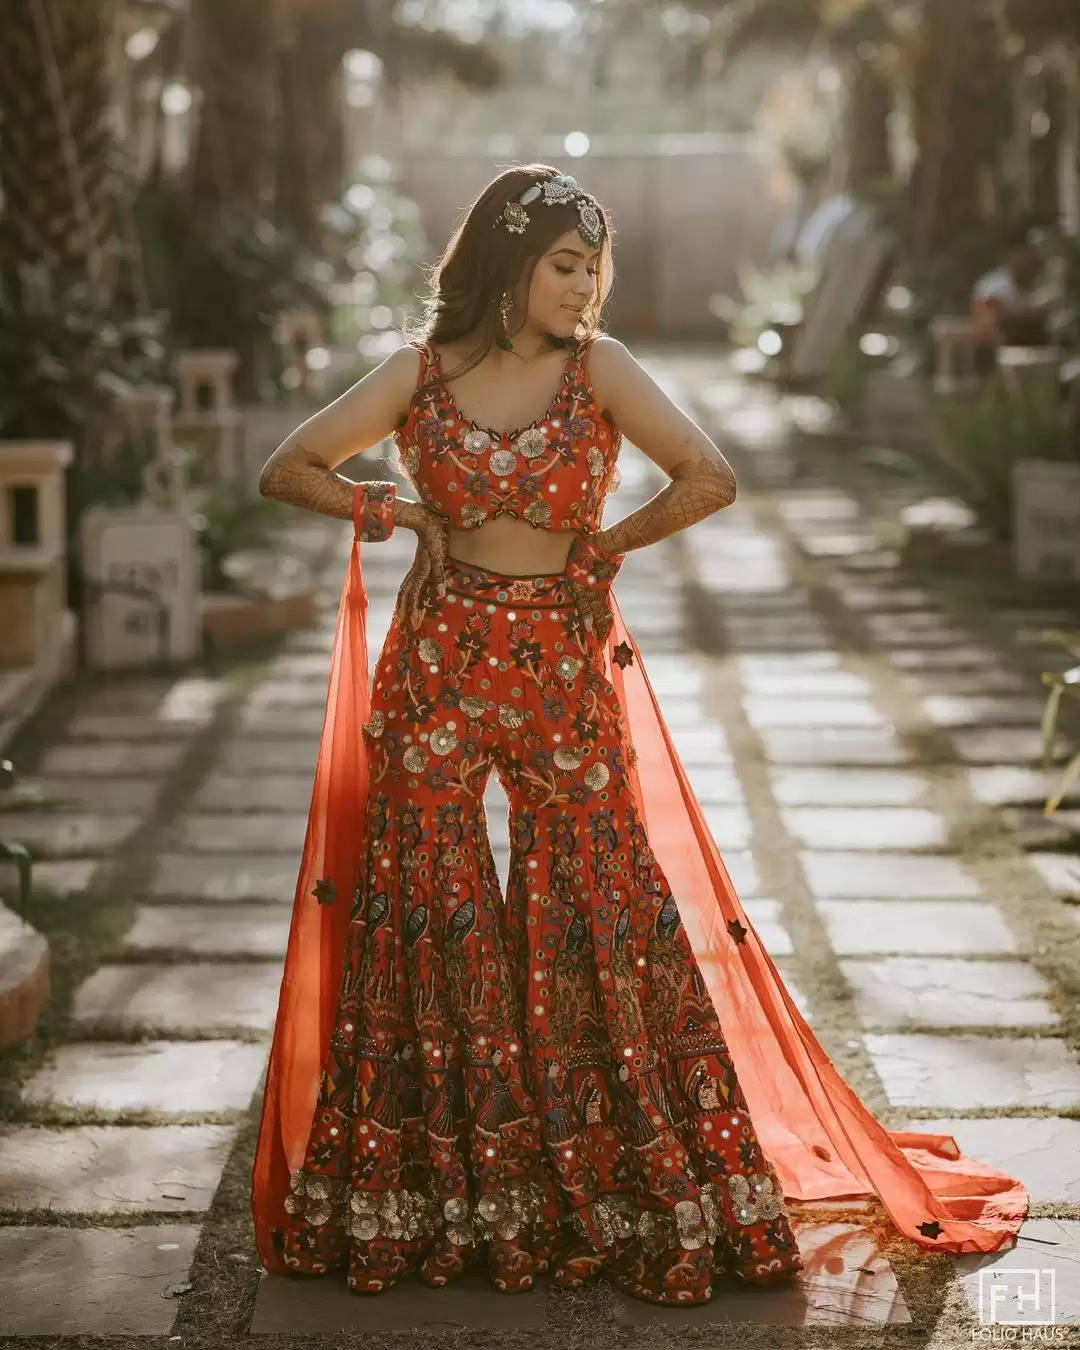 Swooning Over These Actual Brides Rocking Sheeshpatti On Their D-Day!